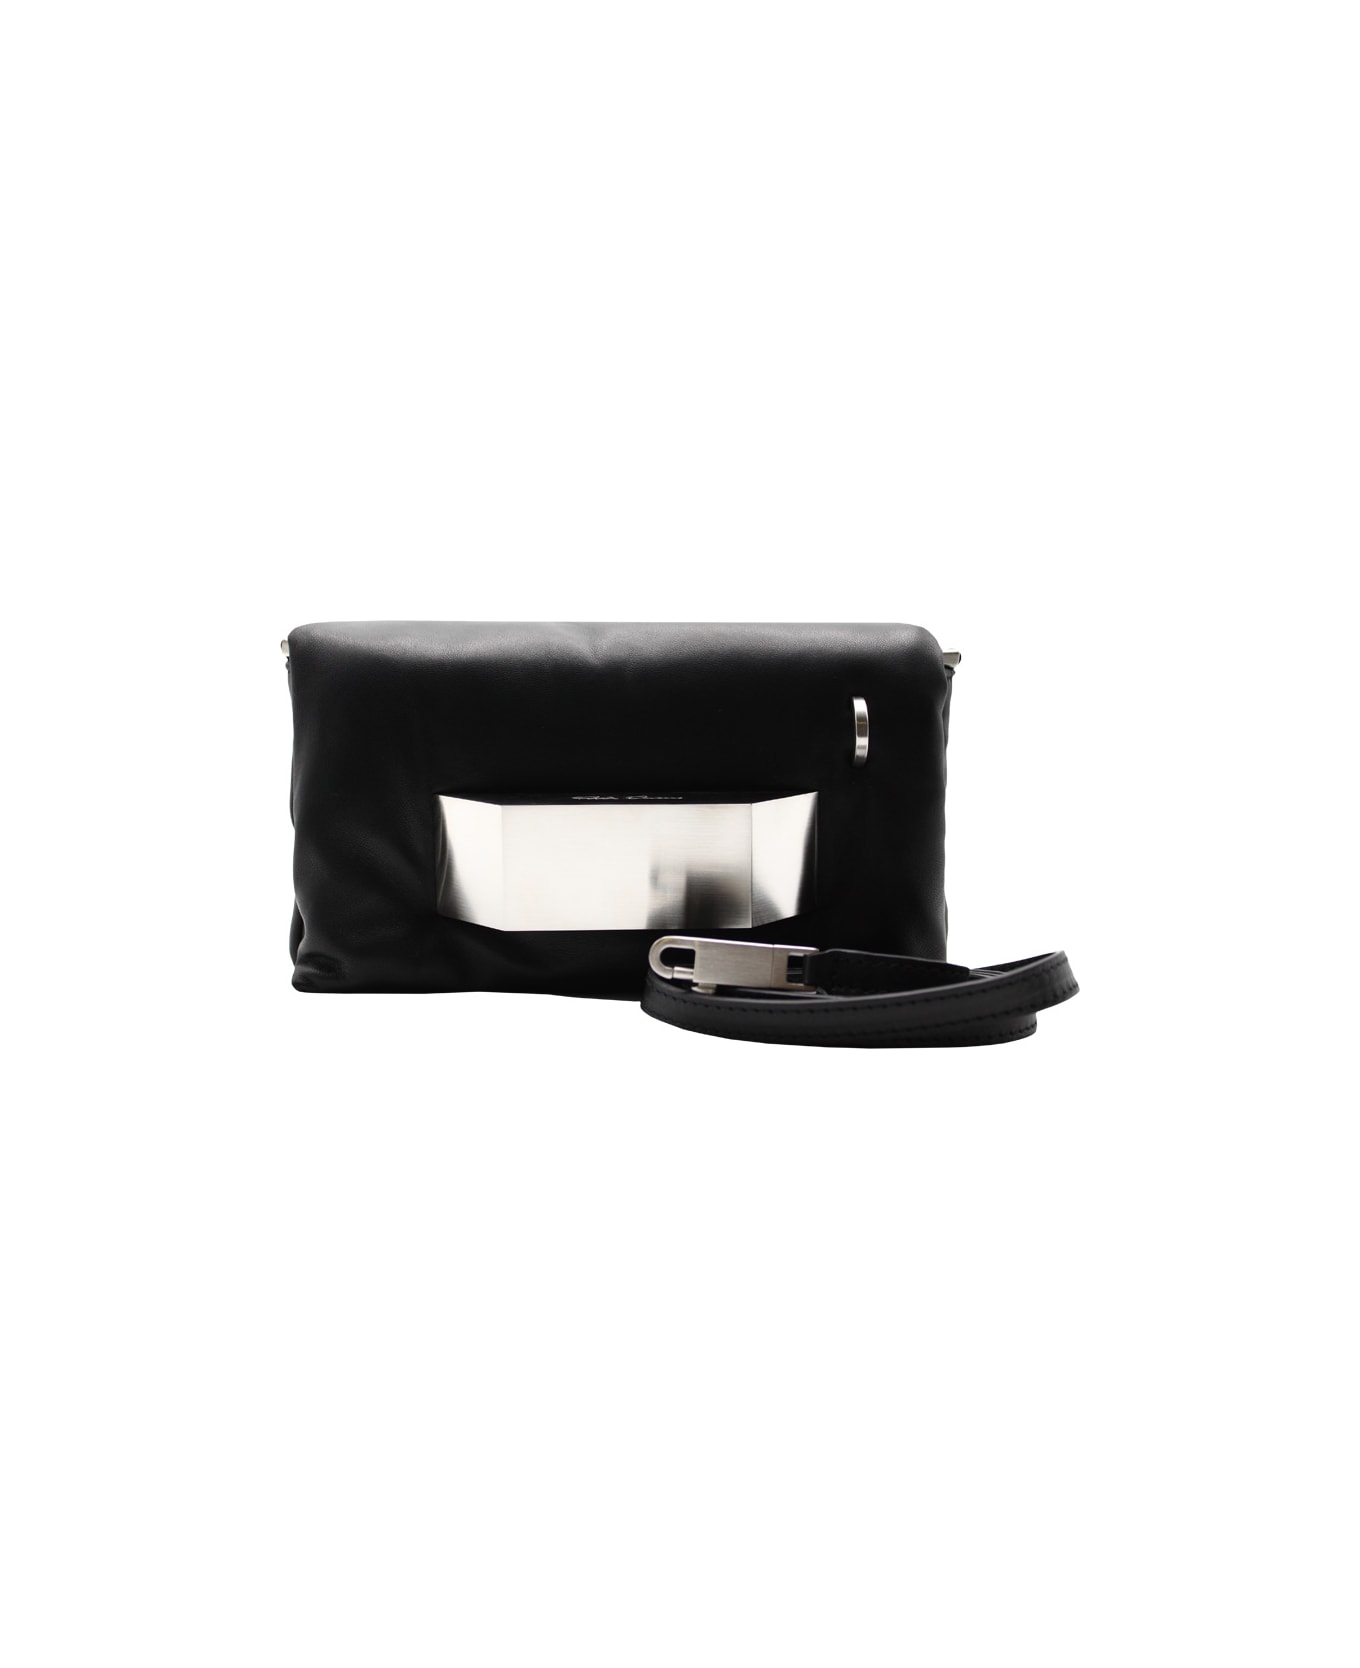 Rick Owens Pillow Griffin Leather Bag | italist